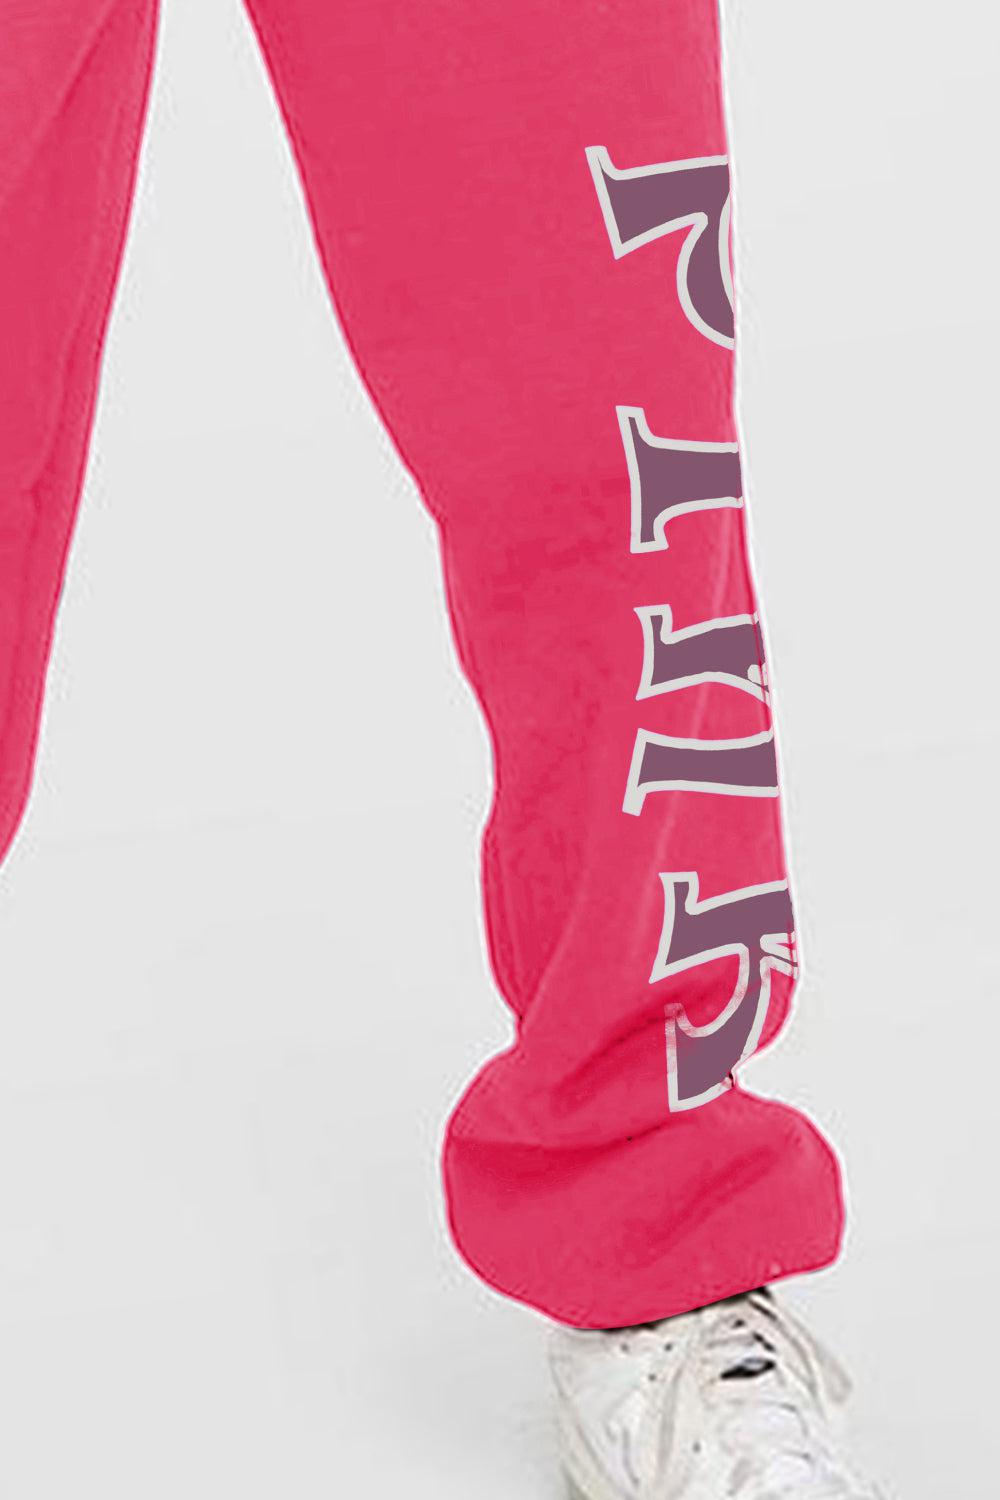 Simply Love Full Size PINK Graphic Sweatpants BLUE ZONE PLANET